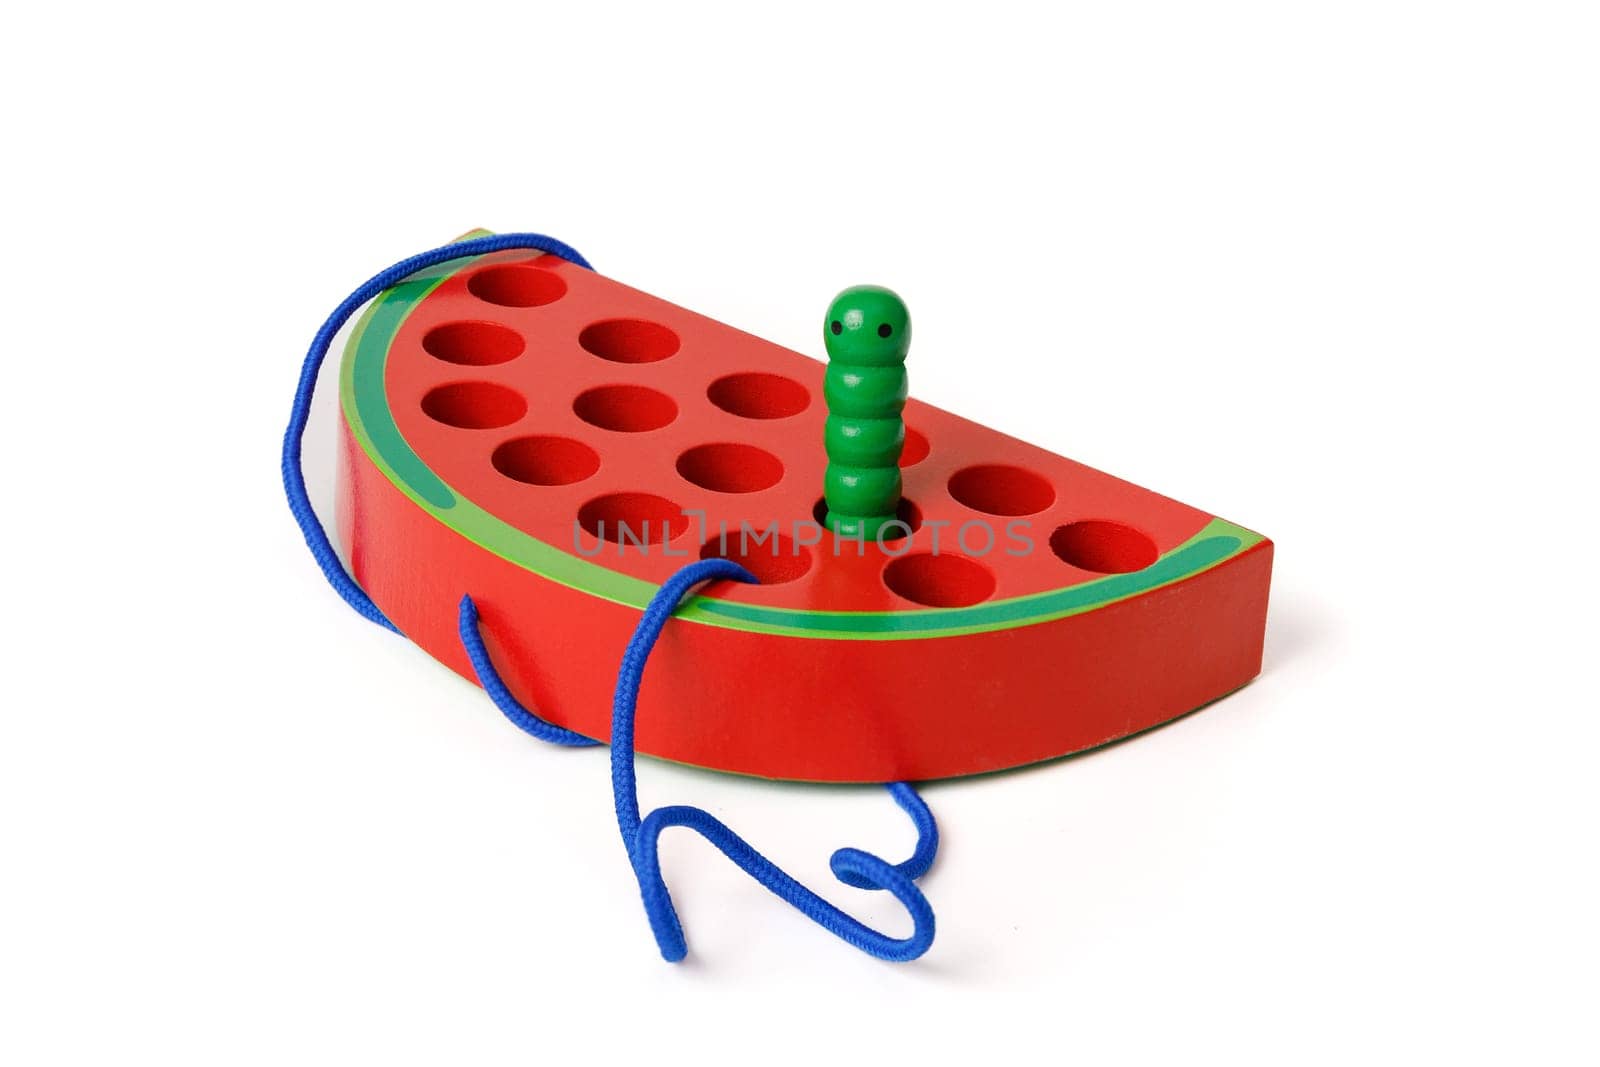 Kid's wooden Montessori toy in the shape of a red watermelon with a funny worm on a rope, toy for fine hand motor skills, isolated on white background by Rom4ek